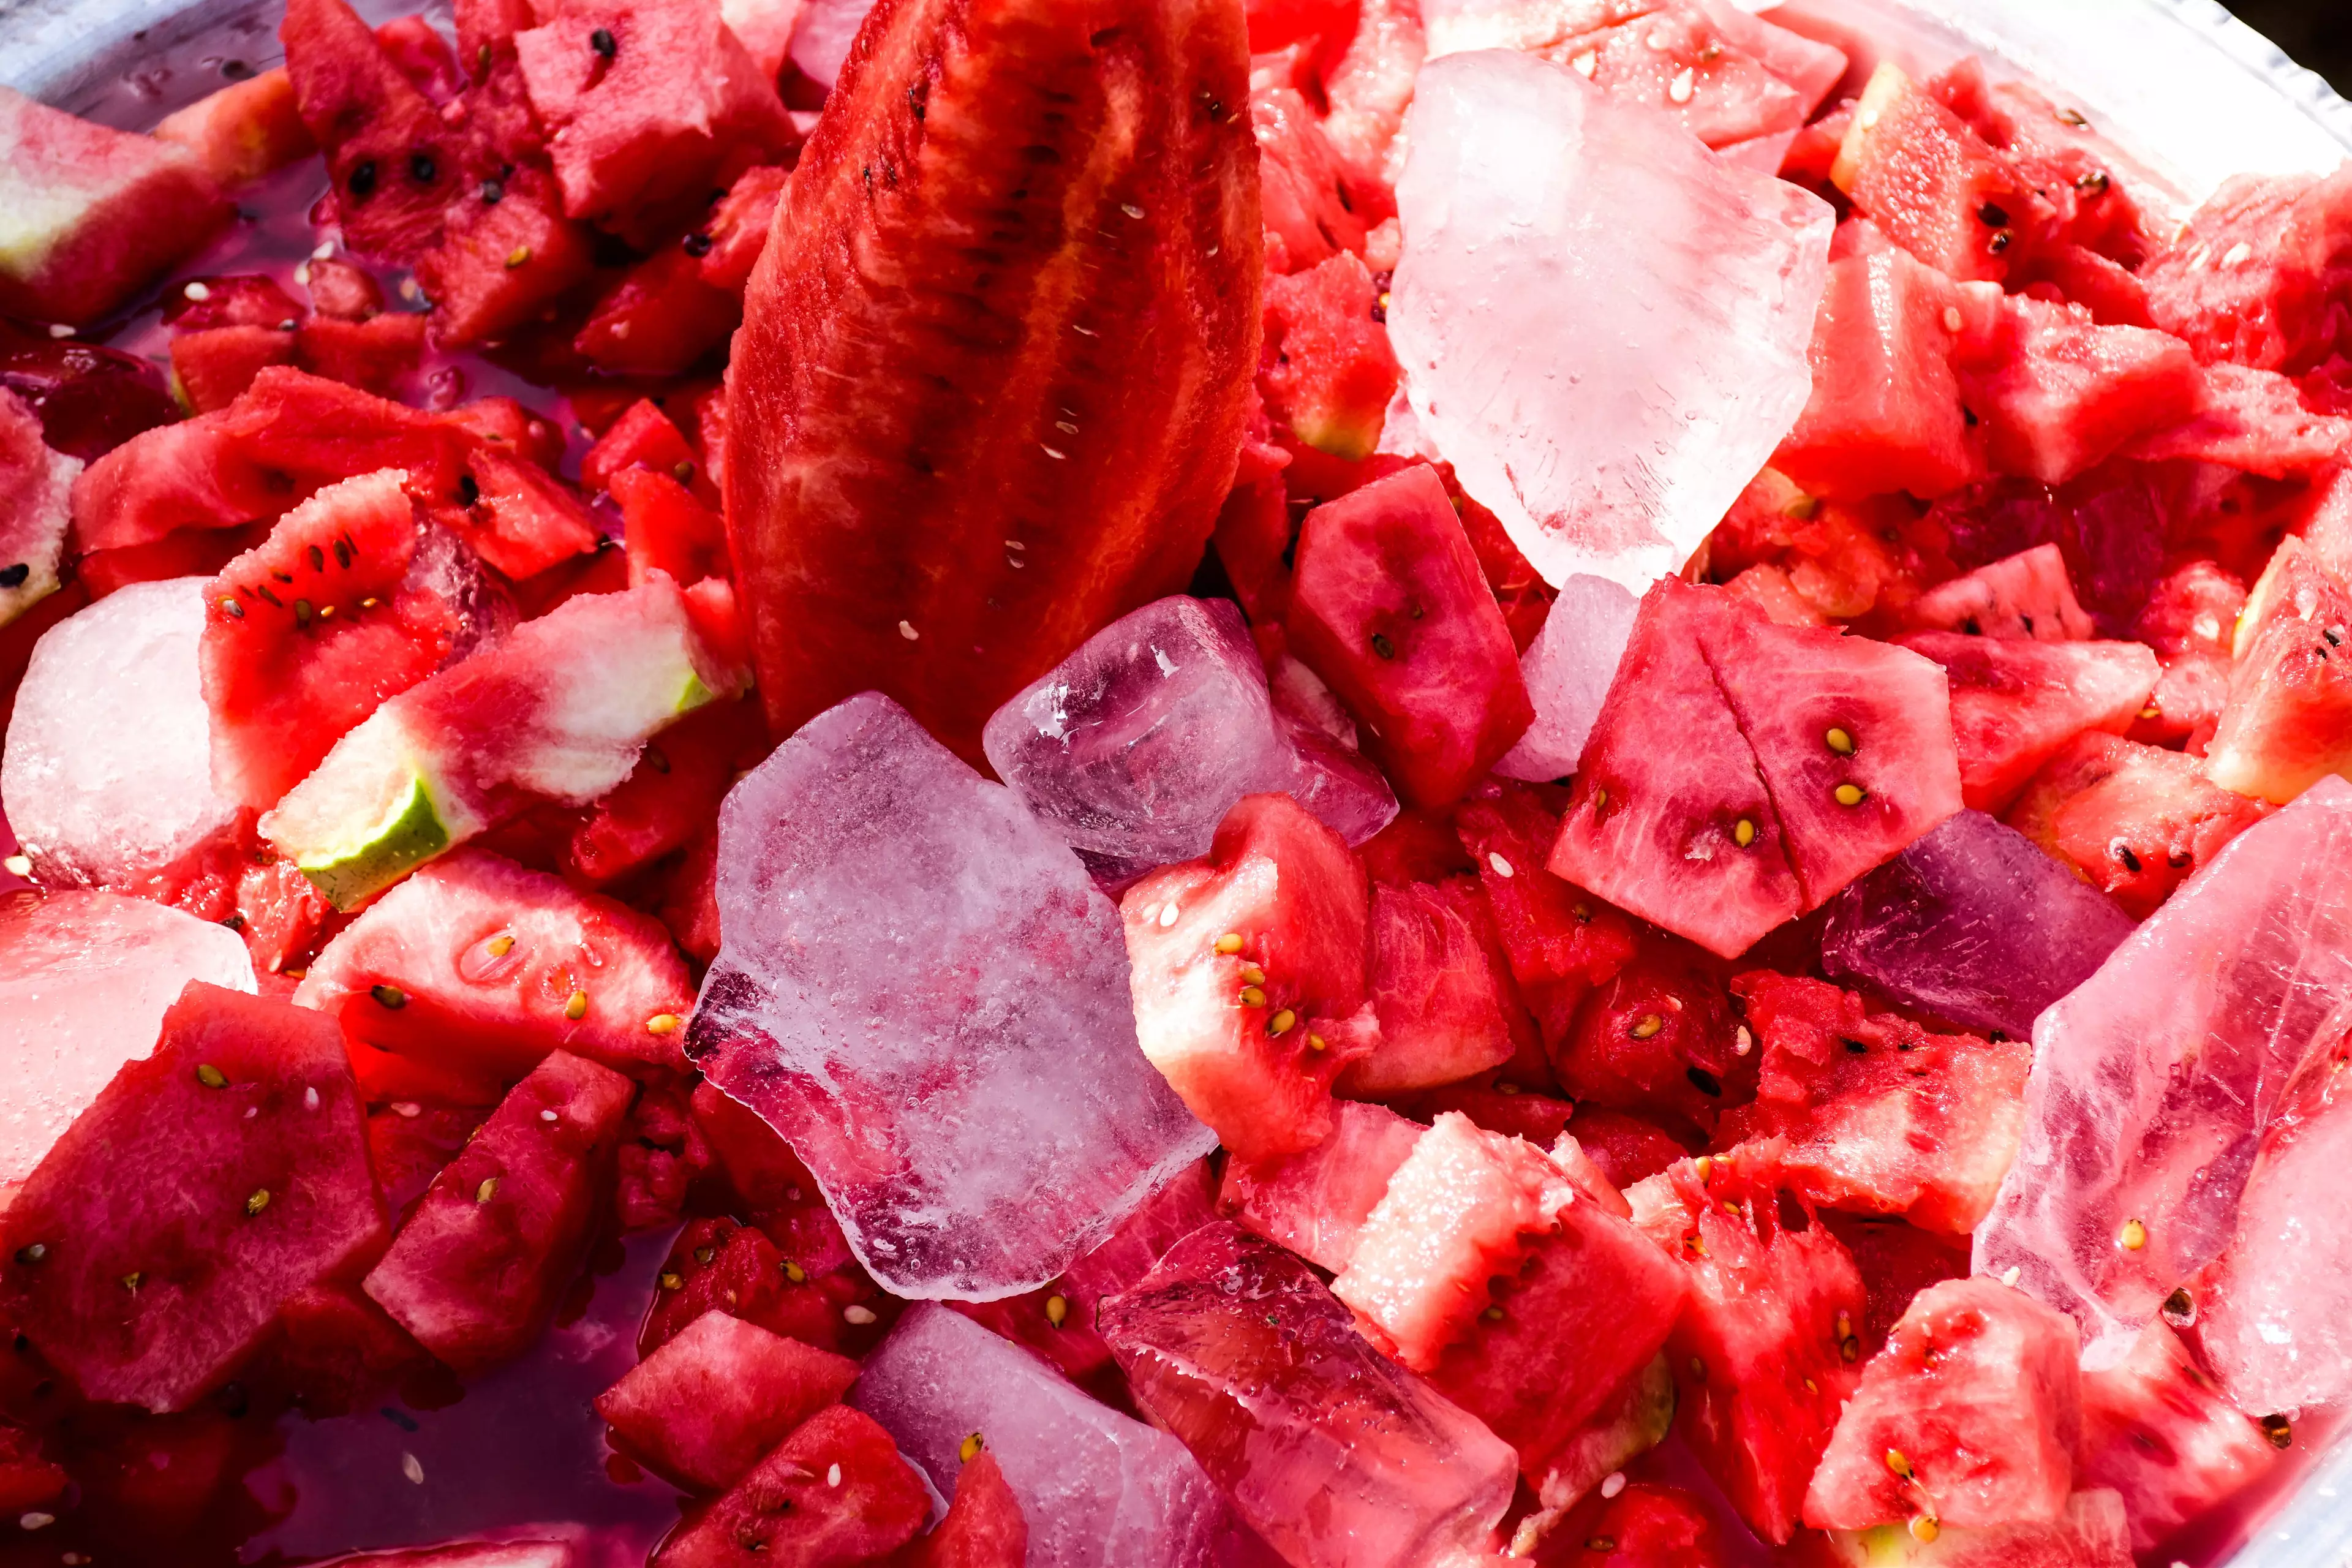 You need to freeze your cubed watermelon for at least four hours (